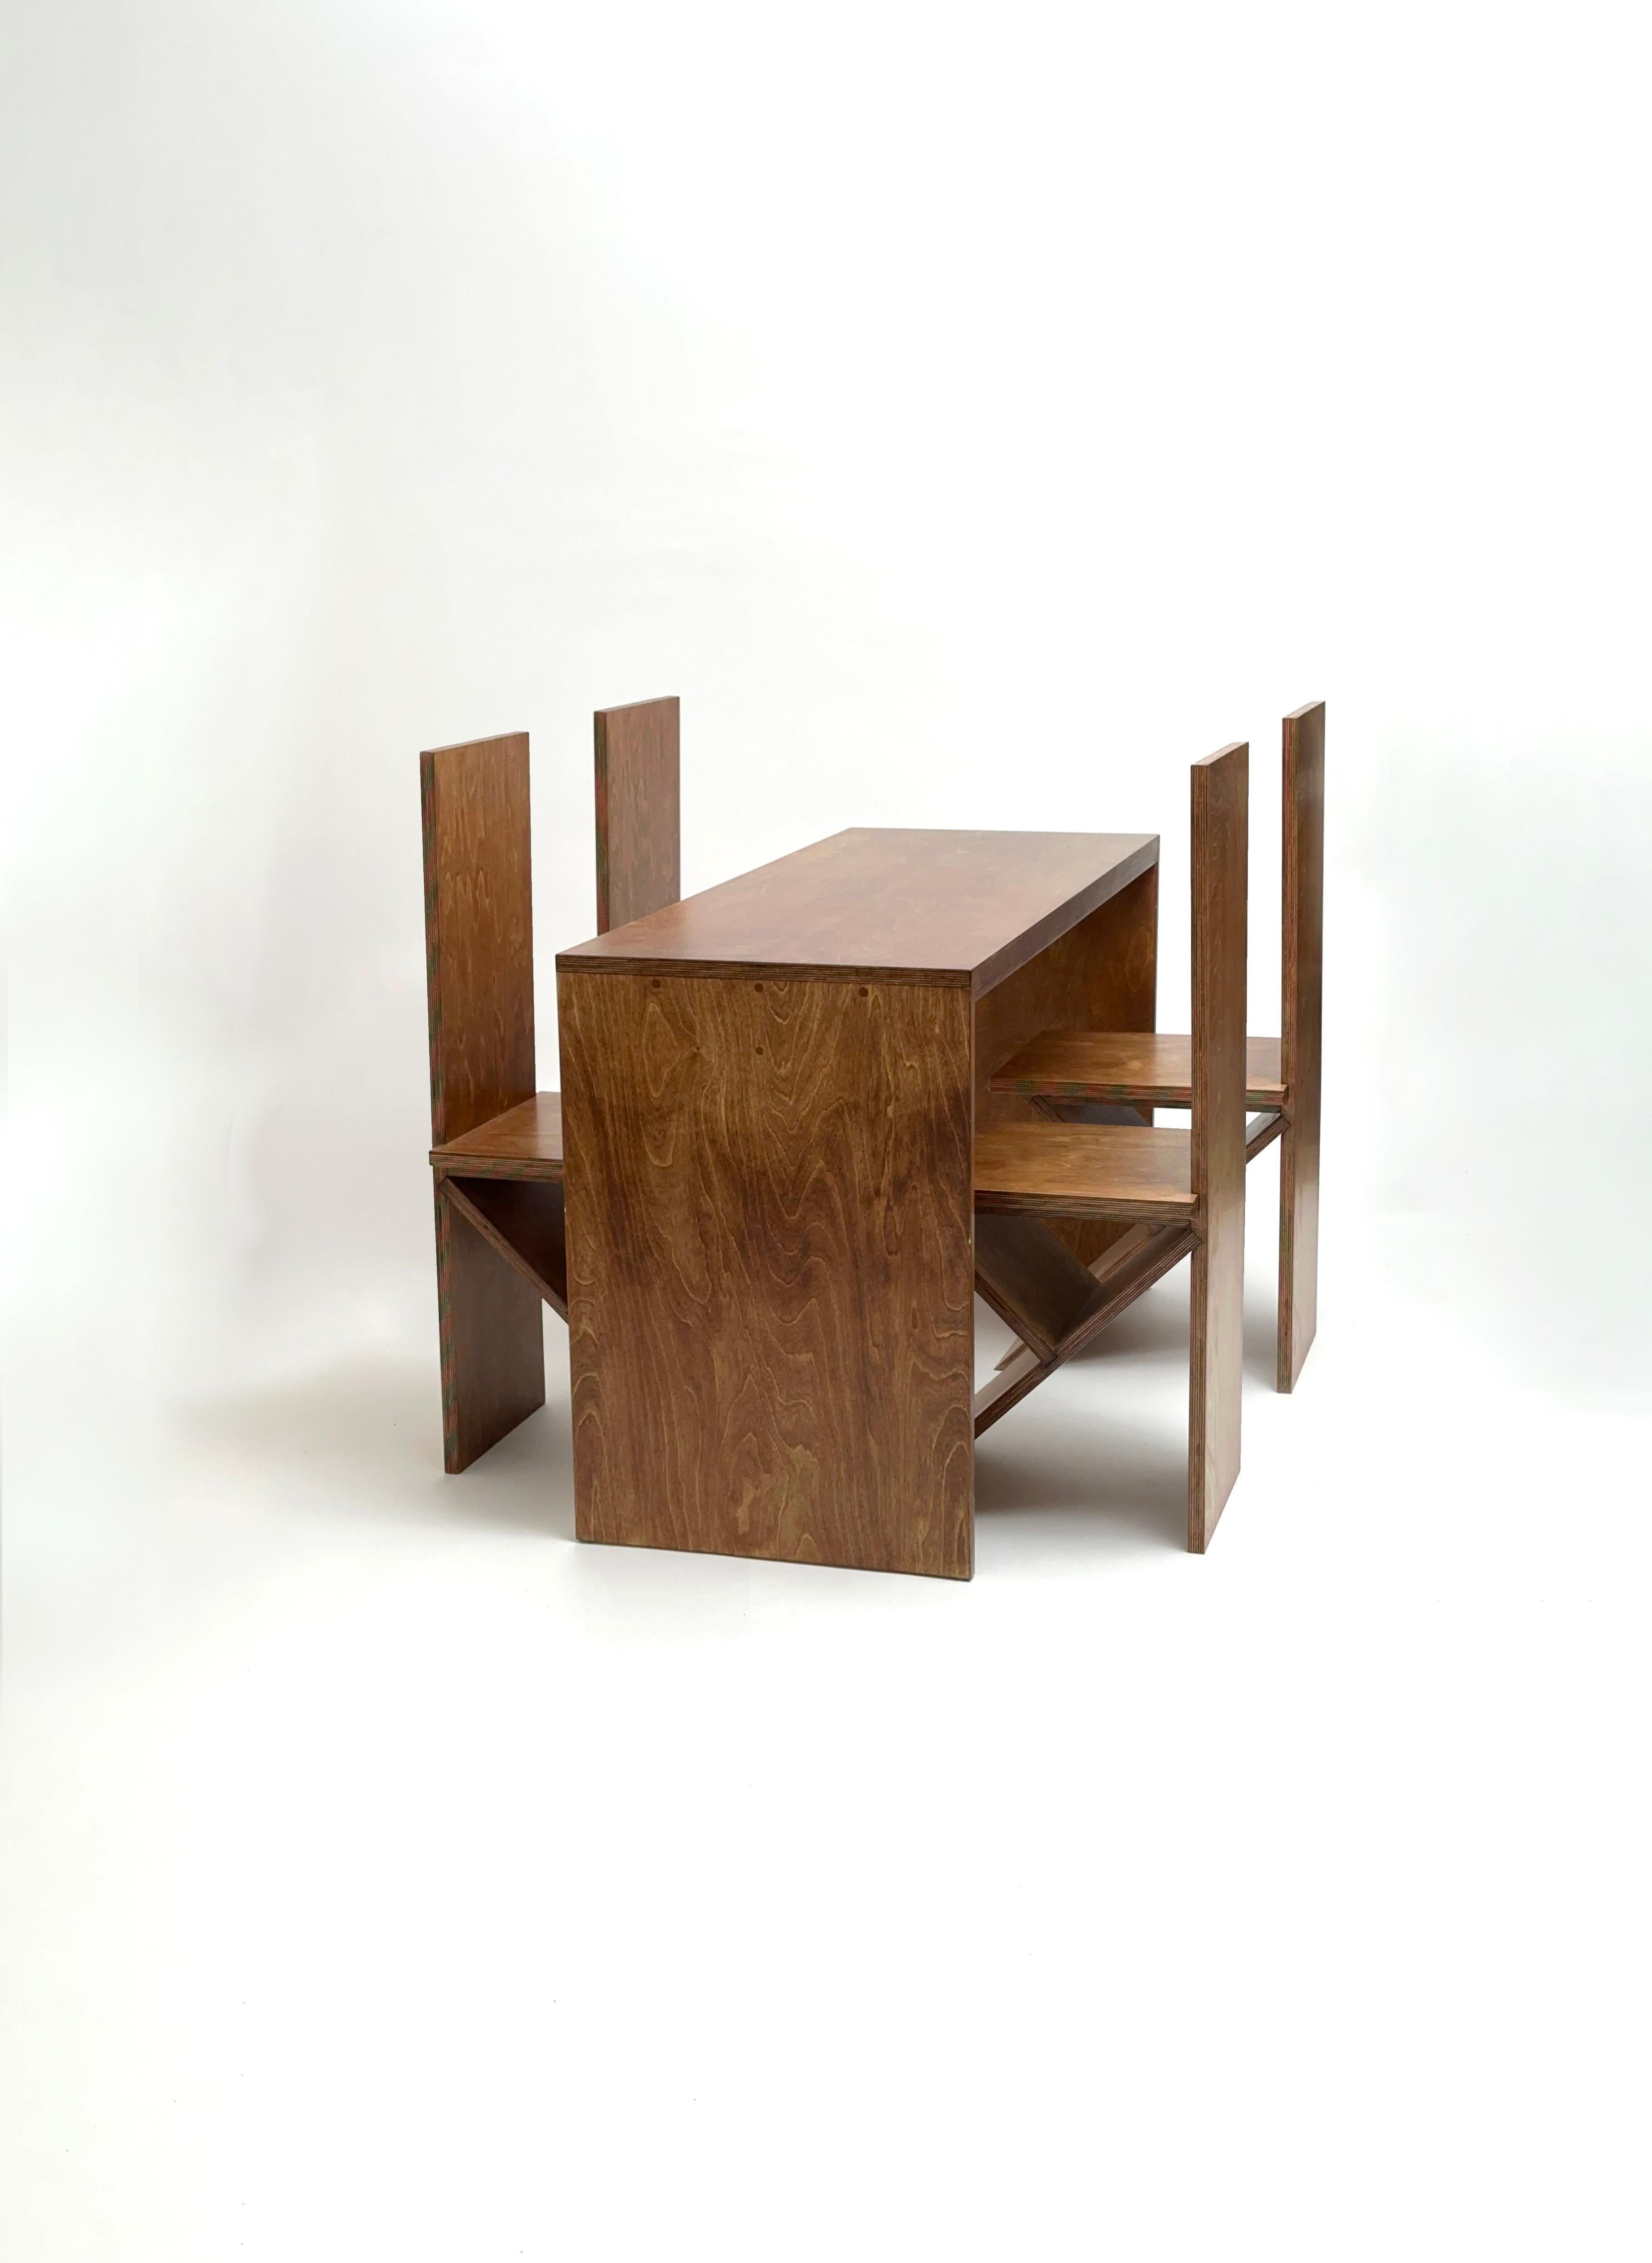 Dining Set by Goons
Dimensions:  
Table: W 130 x D 50 x  H 74 cm
Chair: 35 x 40 x 95 cm
Materials: Wood.

Goons is located in Paris, France. All of their designs are made out of wood.